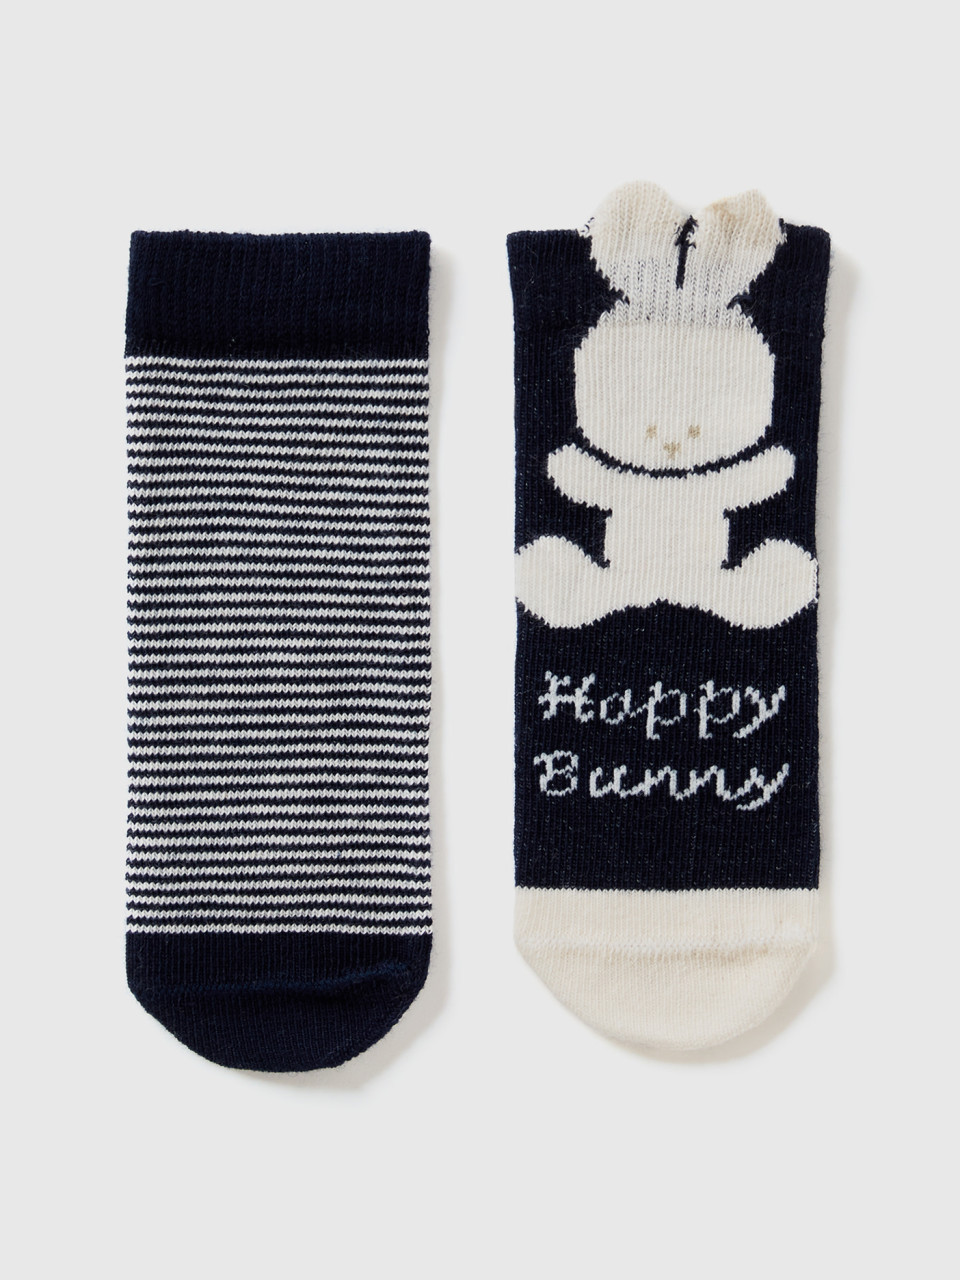 Benetton, Sock Set With Stripes And Bunny, Dark Blue, Kids